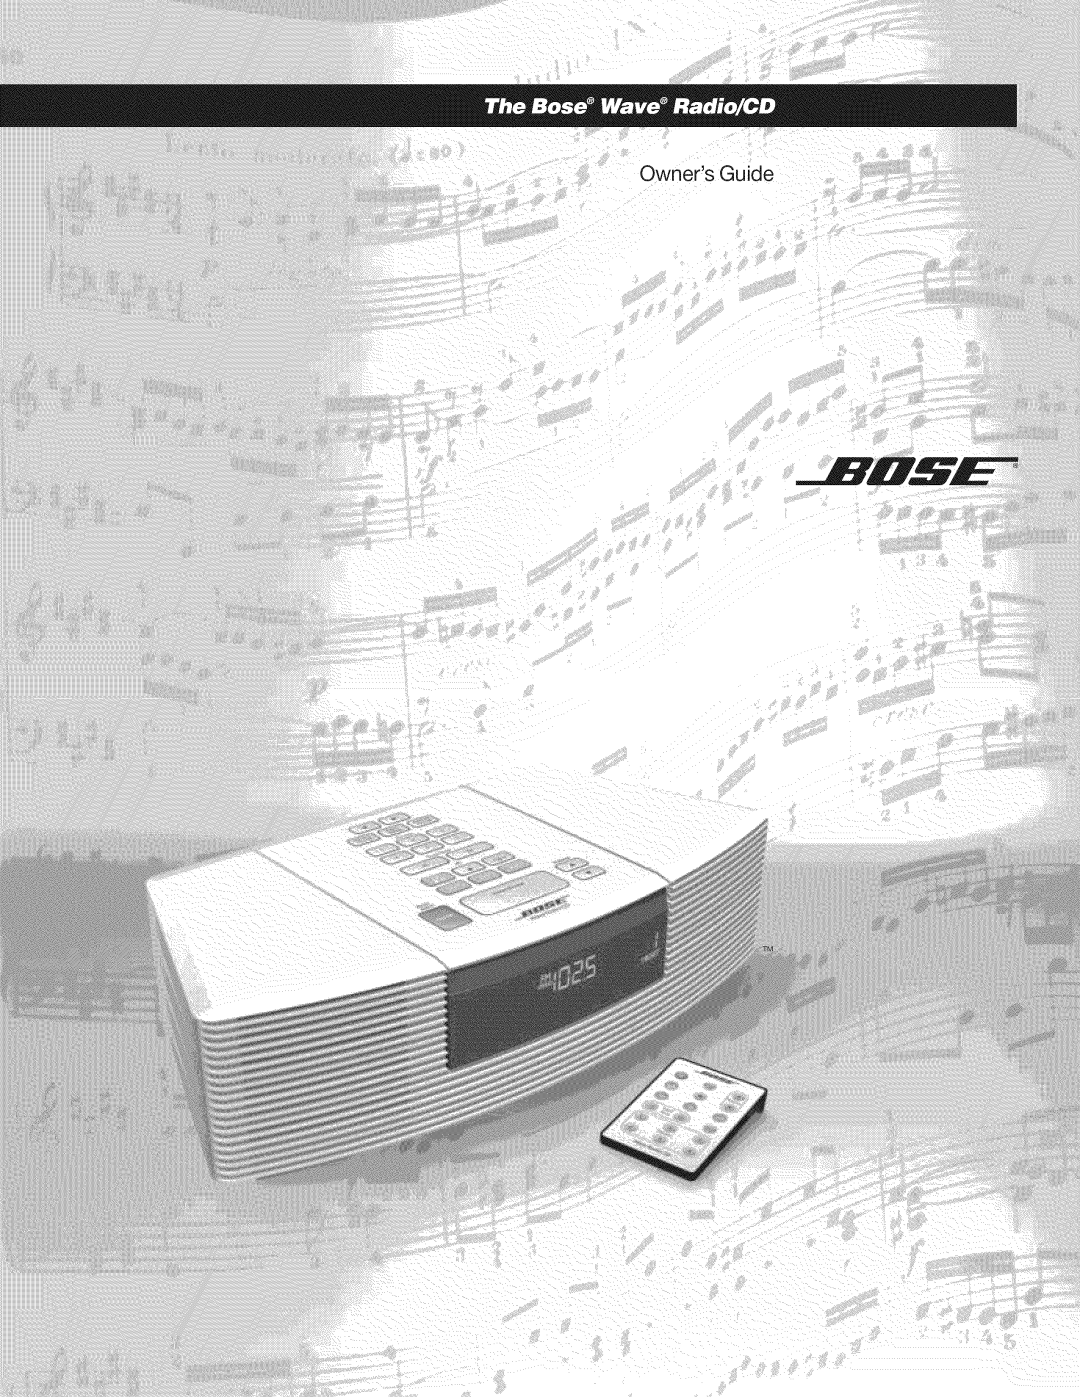 Bose CD Player manual Owners Guide 